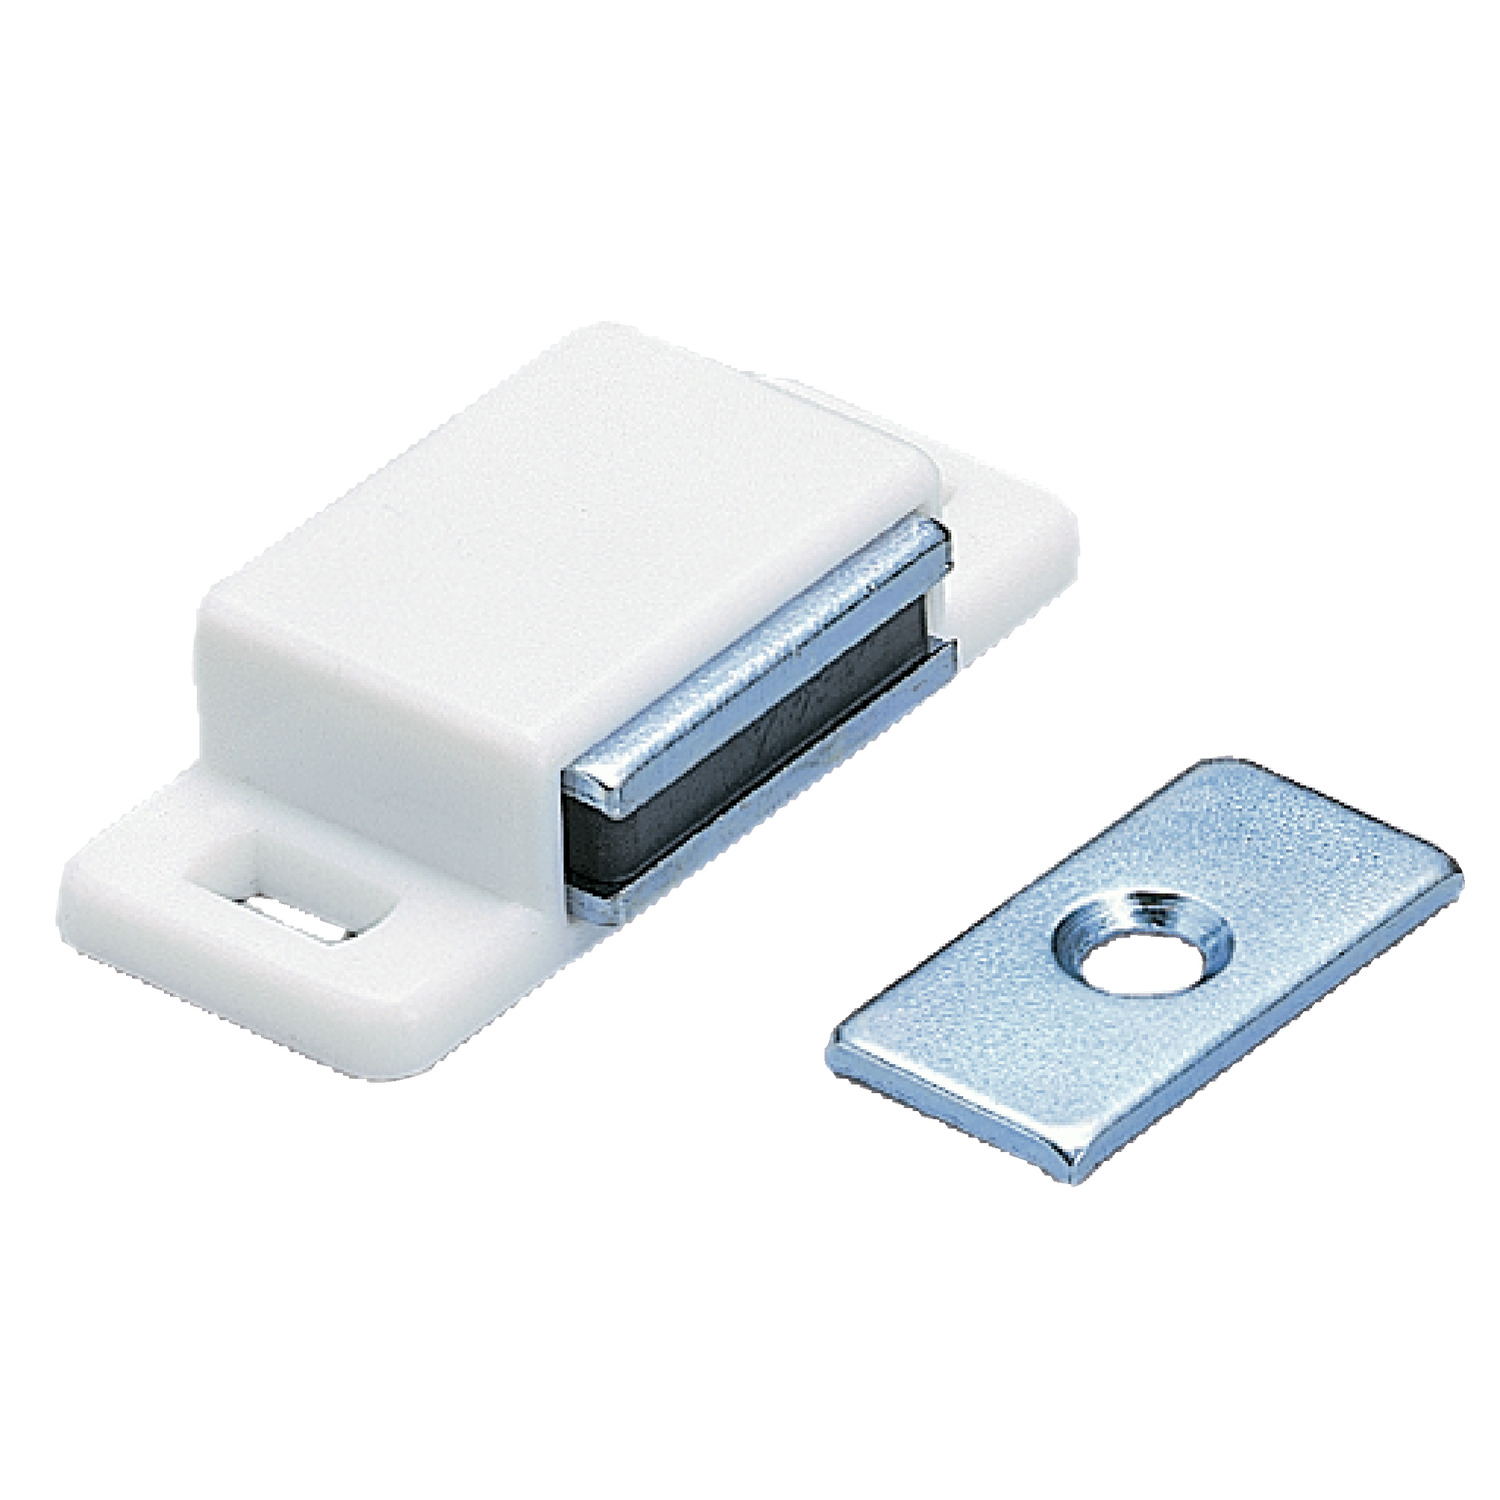 Magnetic Catches Sturdy magnetic catch in plastic housing, hold access panel and covers closed.